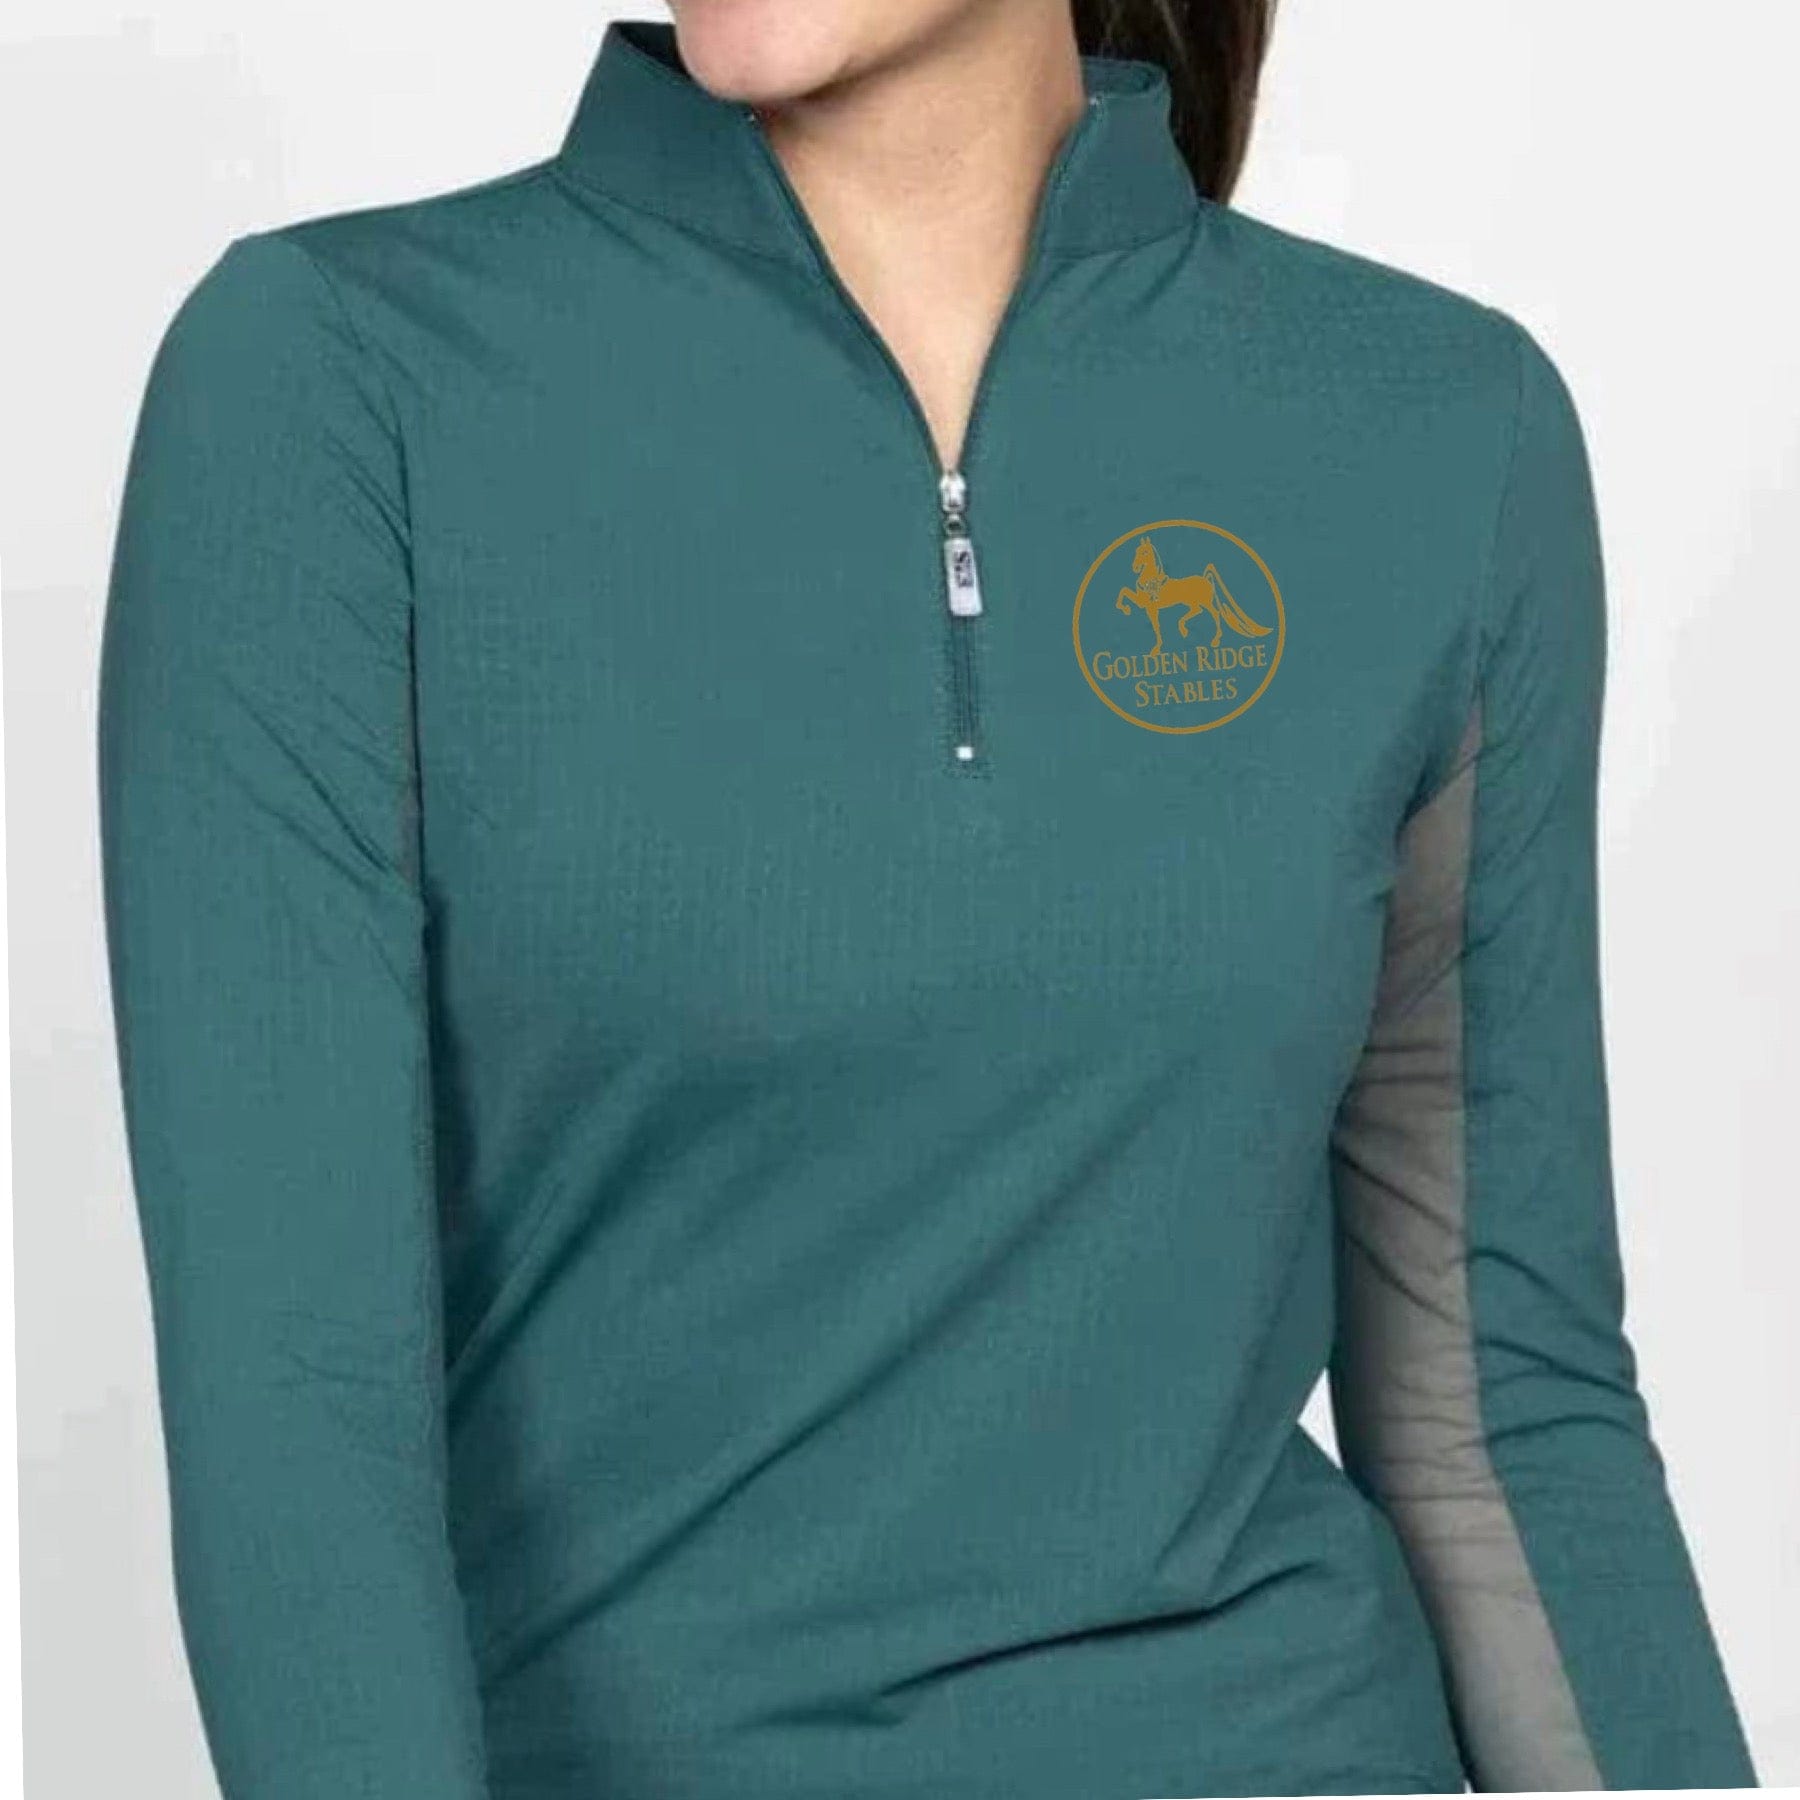 Equestrian Team Apparel Golden Ridge Stables Sun Shirt equestrian team apparel online tack store mobile tack store custom farm apparel custom show stable clothing equestrian lifestyle horse show clothing riding clothes horses equestrian tack store